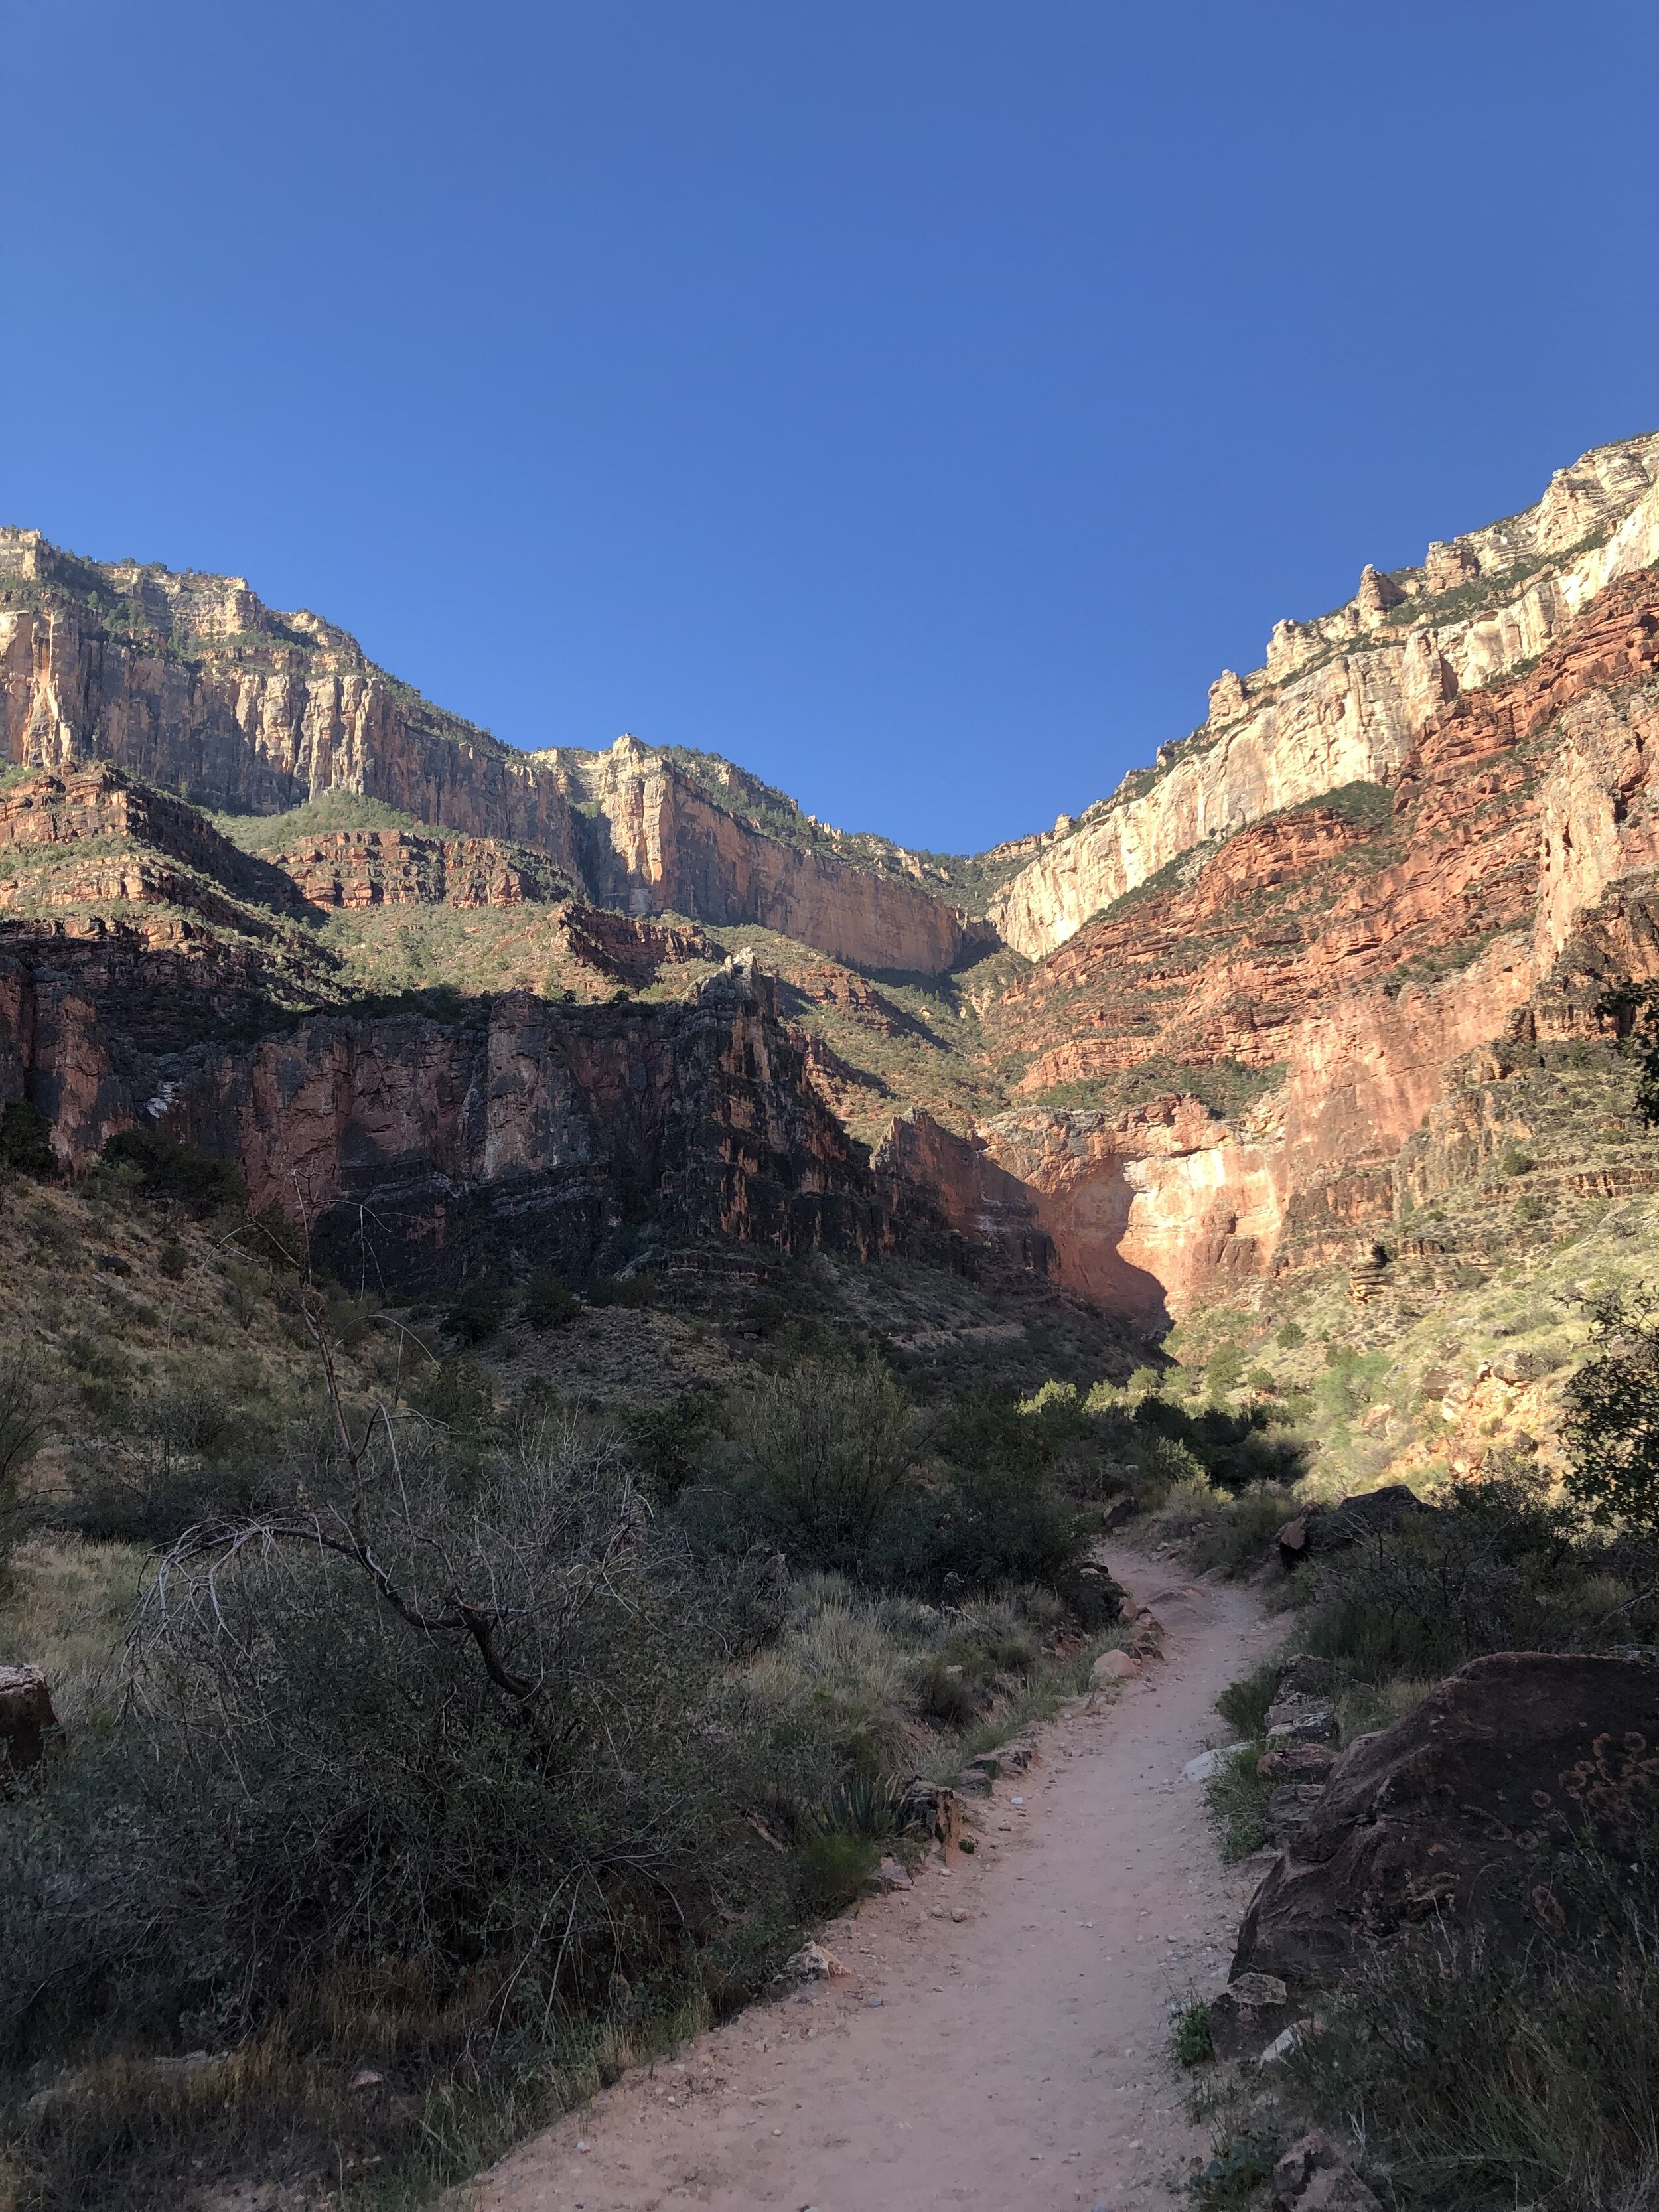 More morning light on the Bright Angel Trail.